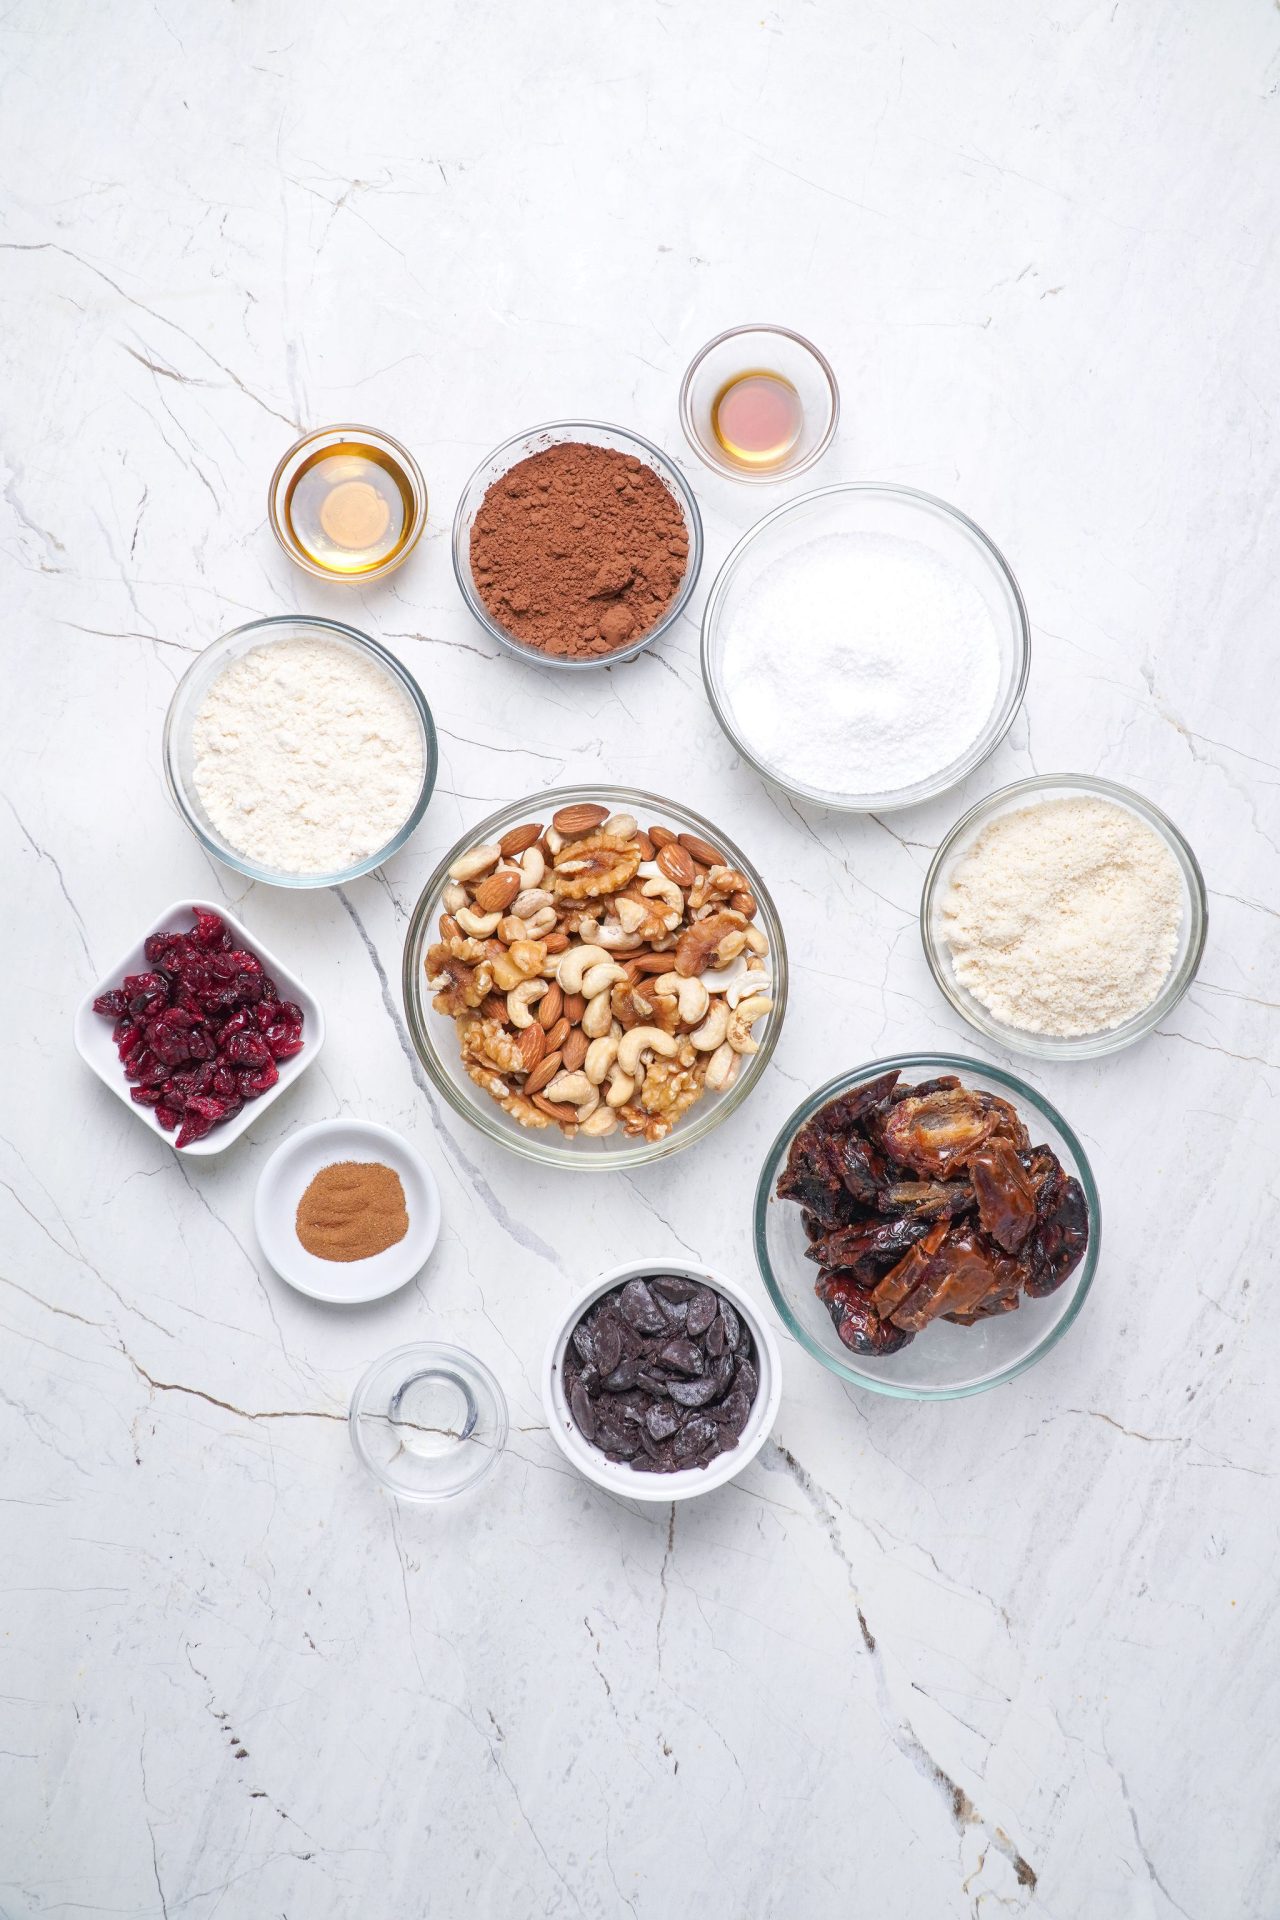 Ingredients to make healthy truffles. In small bowls. Honey, cacao powder, medjool dates, coconut flour, mixed nuts, cranberries, cinnamon, vanilla, dark chocolate.